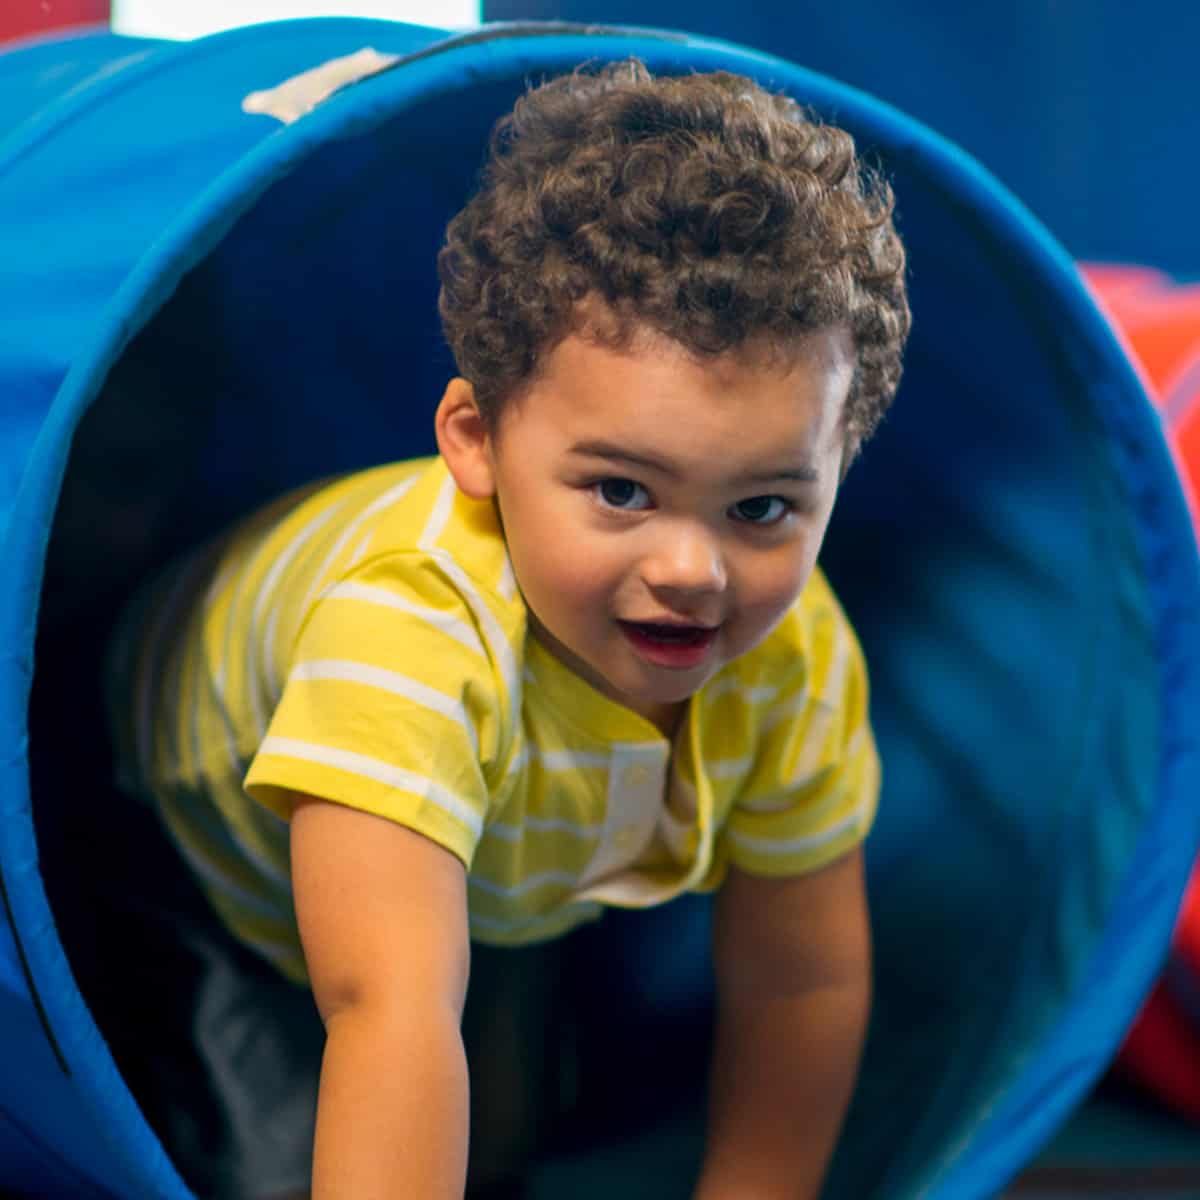 Easy sensory activities for toddlers that aren't just fun and keep your kiddo busy, but also help them develop and learn from an occupational therapist!